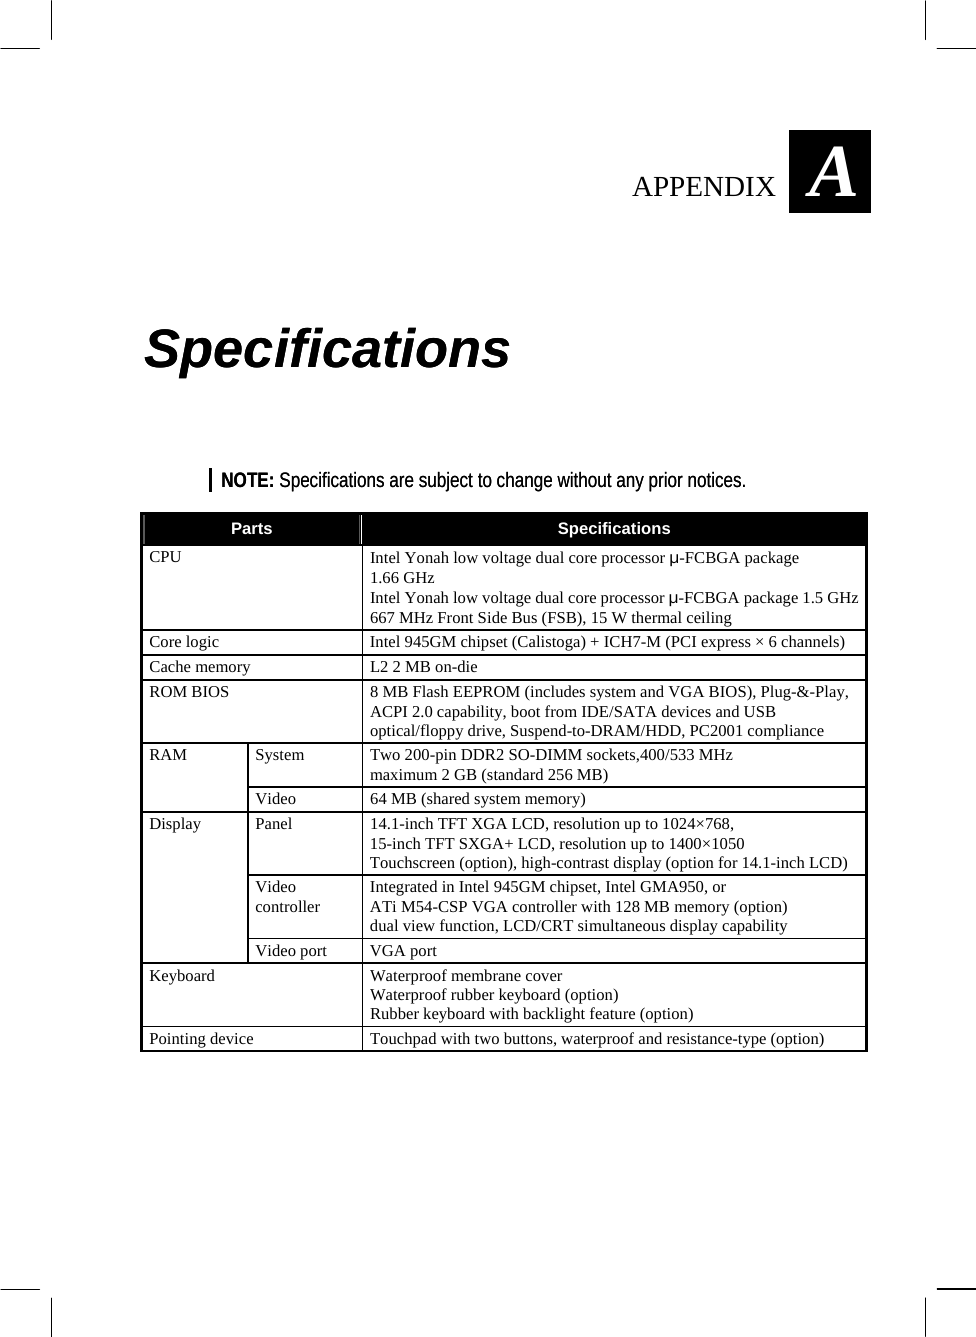  AAPPENDIX  Specifications Specifications NOTE: Specifications are subject to change without any prior notices. NOTE: Specifications are subject to change without any prior notices.  Parts  Specifications CPU  Intel Yonah low voltage dual core processor µ-FCBGA package 1.66 GHz Intel Yonah low voltage dual core processor µ-FCBGA package 1.5 GHz 667 MHz Front Side Bus (FSB), 15 W thermal ceiling Core logic  Intel 945GM chipset (Calistoga) + ICH7-M (PCI express × 6 channels) Cache memory  L2 2 MB on-die ROM BIOS  8 MB Flash EEPROM (includes system and VGA BIOS), Plug-&amp;-Play, ACPI 2.0 capability, boot from IDE/SATA devices and USB optical/floppy drive, Suspend-to-DRAM/HDD, PC2001 compliance System  Two 200-pin DDR2 SO-DIMM sockets,400/533 MHz maximum 2 GB (standard 256 MB) RAM Video  64 MB (shared system memory) Panel  14.1-inch TFT XGA LCD, resolution up to 1024×768, 15-inch TFT SXGA+ LCD, resolution up to 1400×1050 Touchscreen (option), high-contrast display (option for 14.1-inch LCD) Video controller  Integrated in Intel 945GM chipset, Intel GMA950, or ATi M54-CSP VGA controller with 128 MB memory (option) dual view function, LCD/CRT simultaneous display capability Display Video port  VGA port Keyboard Waterproof membrane cover Waterproof rubber keyboard (option) Rubber keyboard with backlight feature (option) Pointing device  Touchpad with two buttons, waterproof and resistance-type (option)          